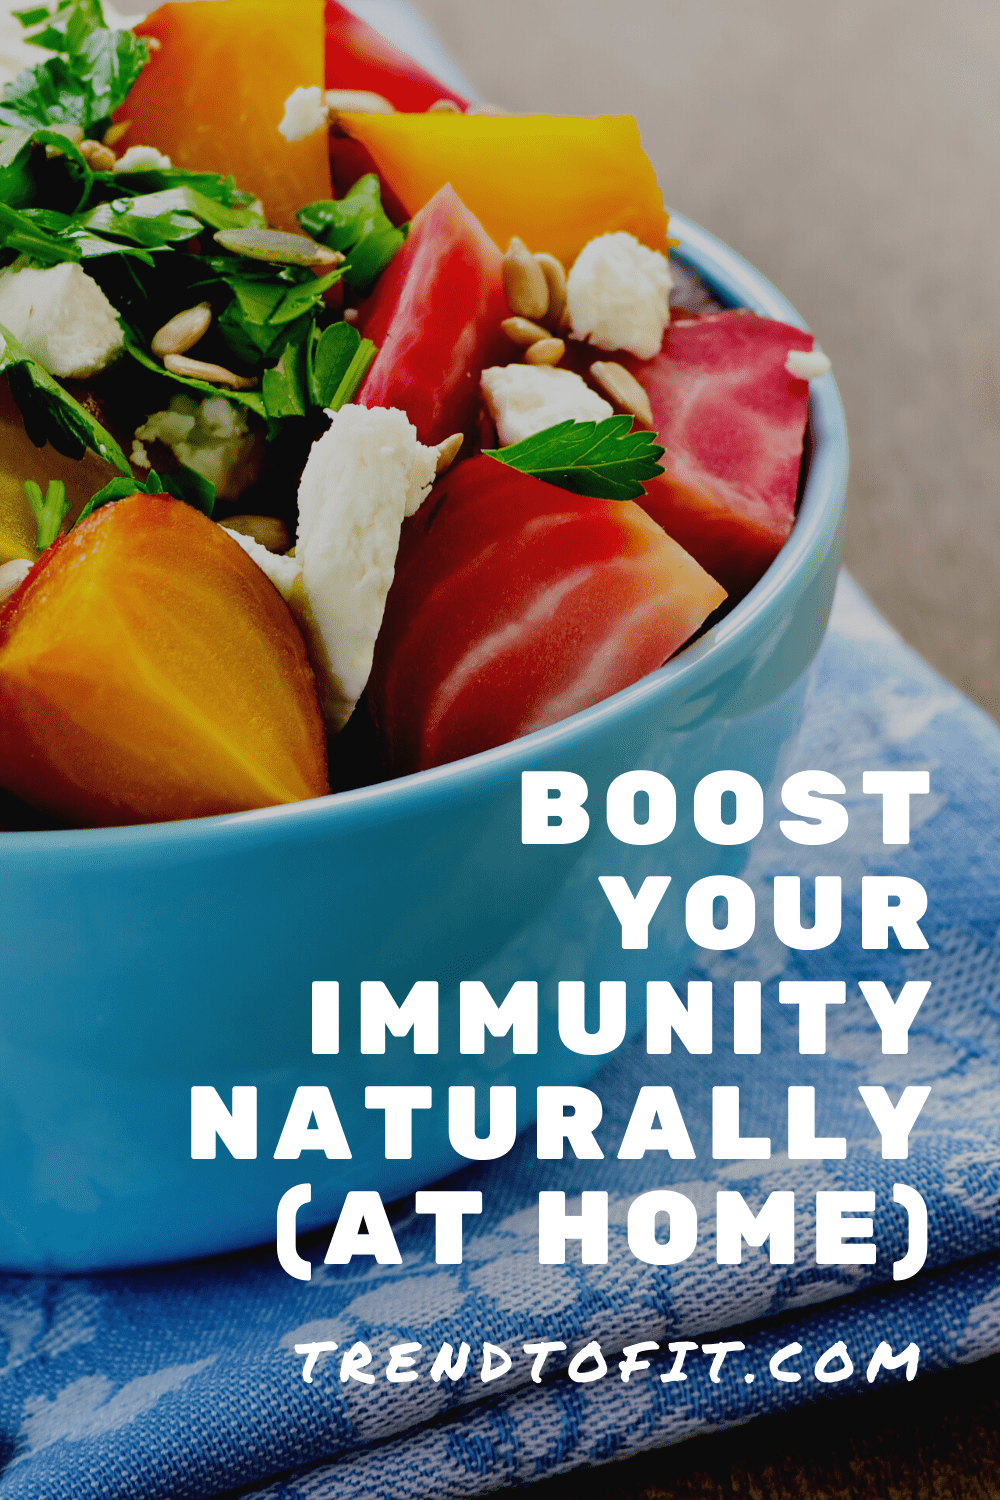 15 tips on how to boost your immune system naturally and safely